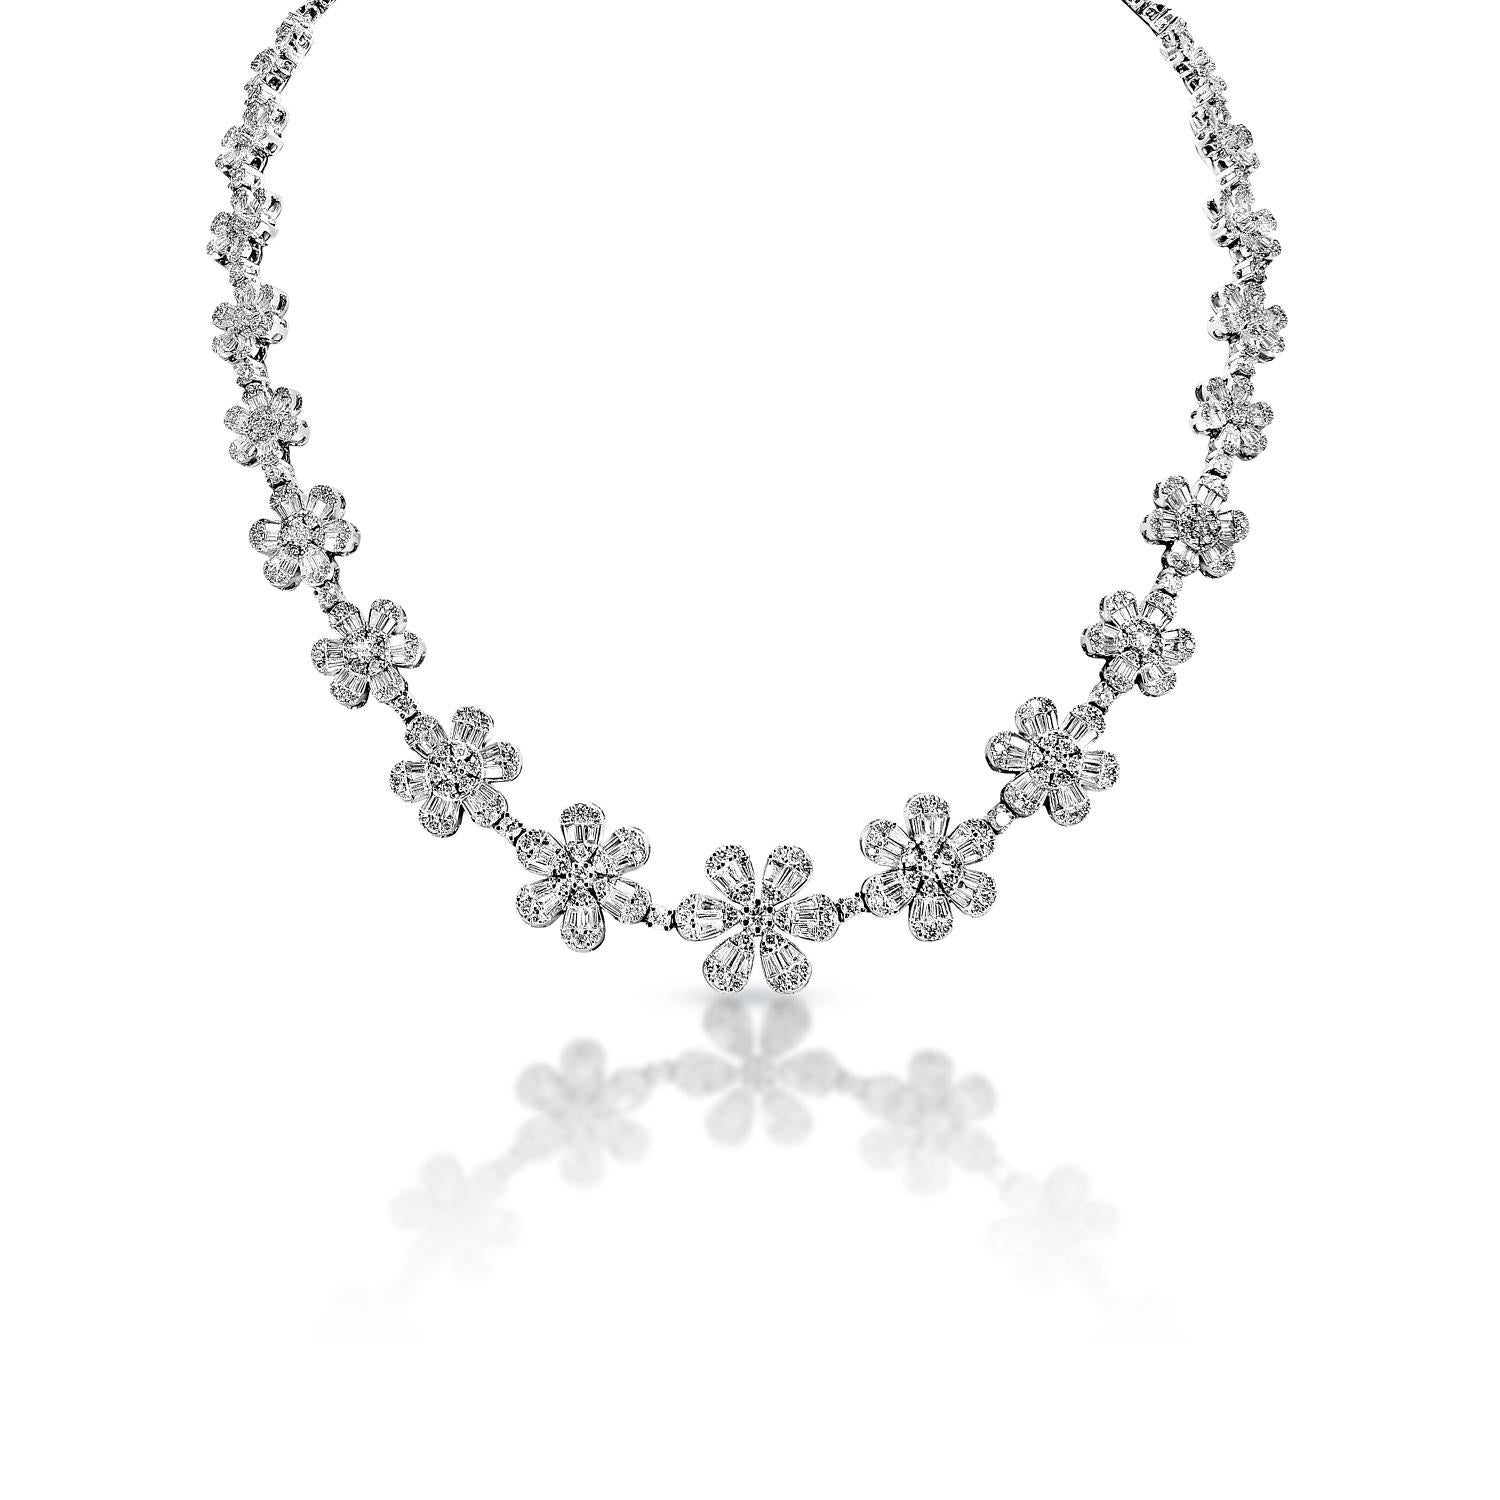 Diamond Necklace:

Carat Weight: 13.06 Carats
Style: Round Brilliant Cut
Chains: 14k White Gold